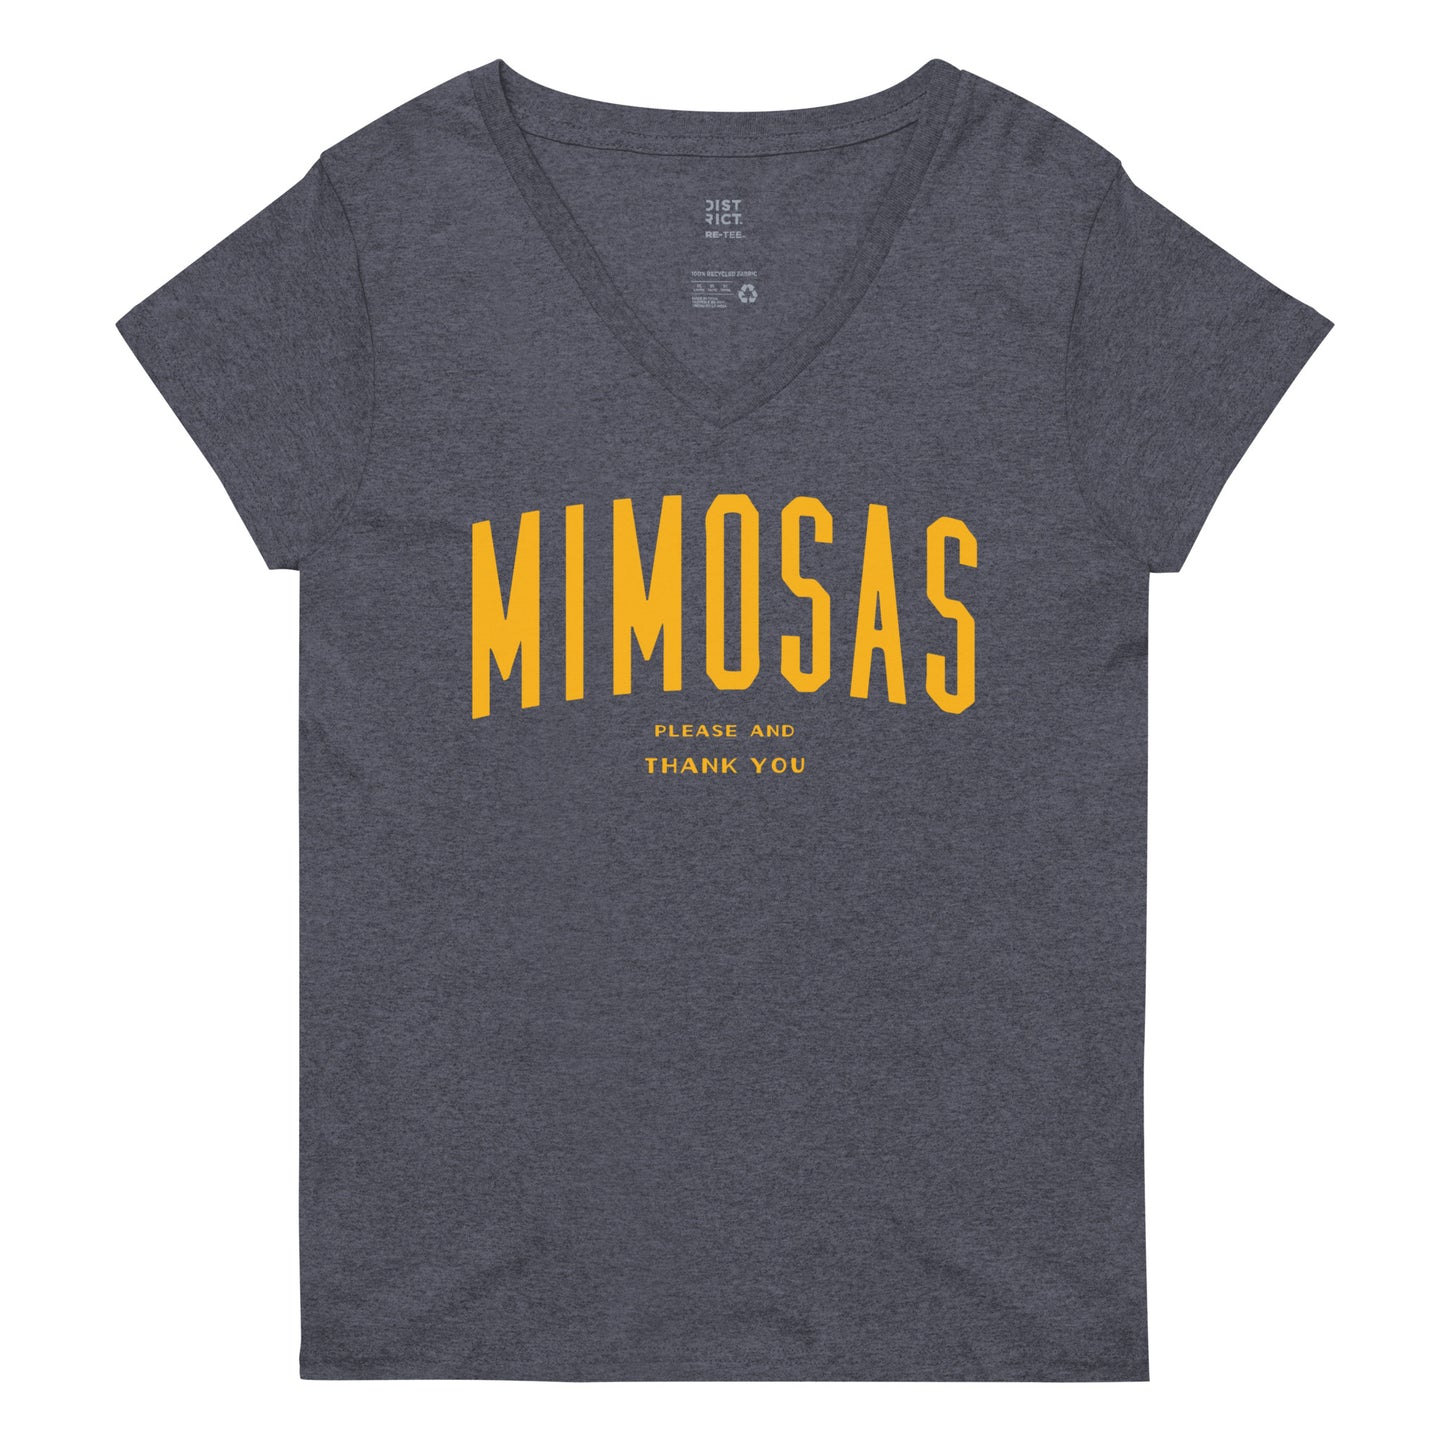 Mimosas Please And Thank You Women's V-Neck Tee